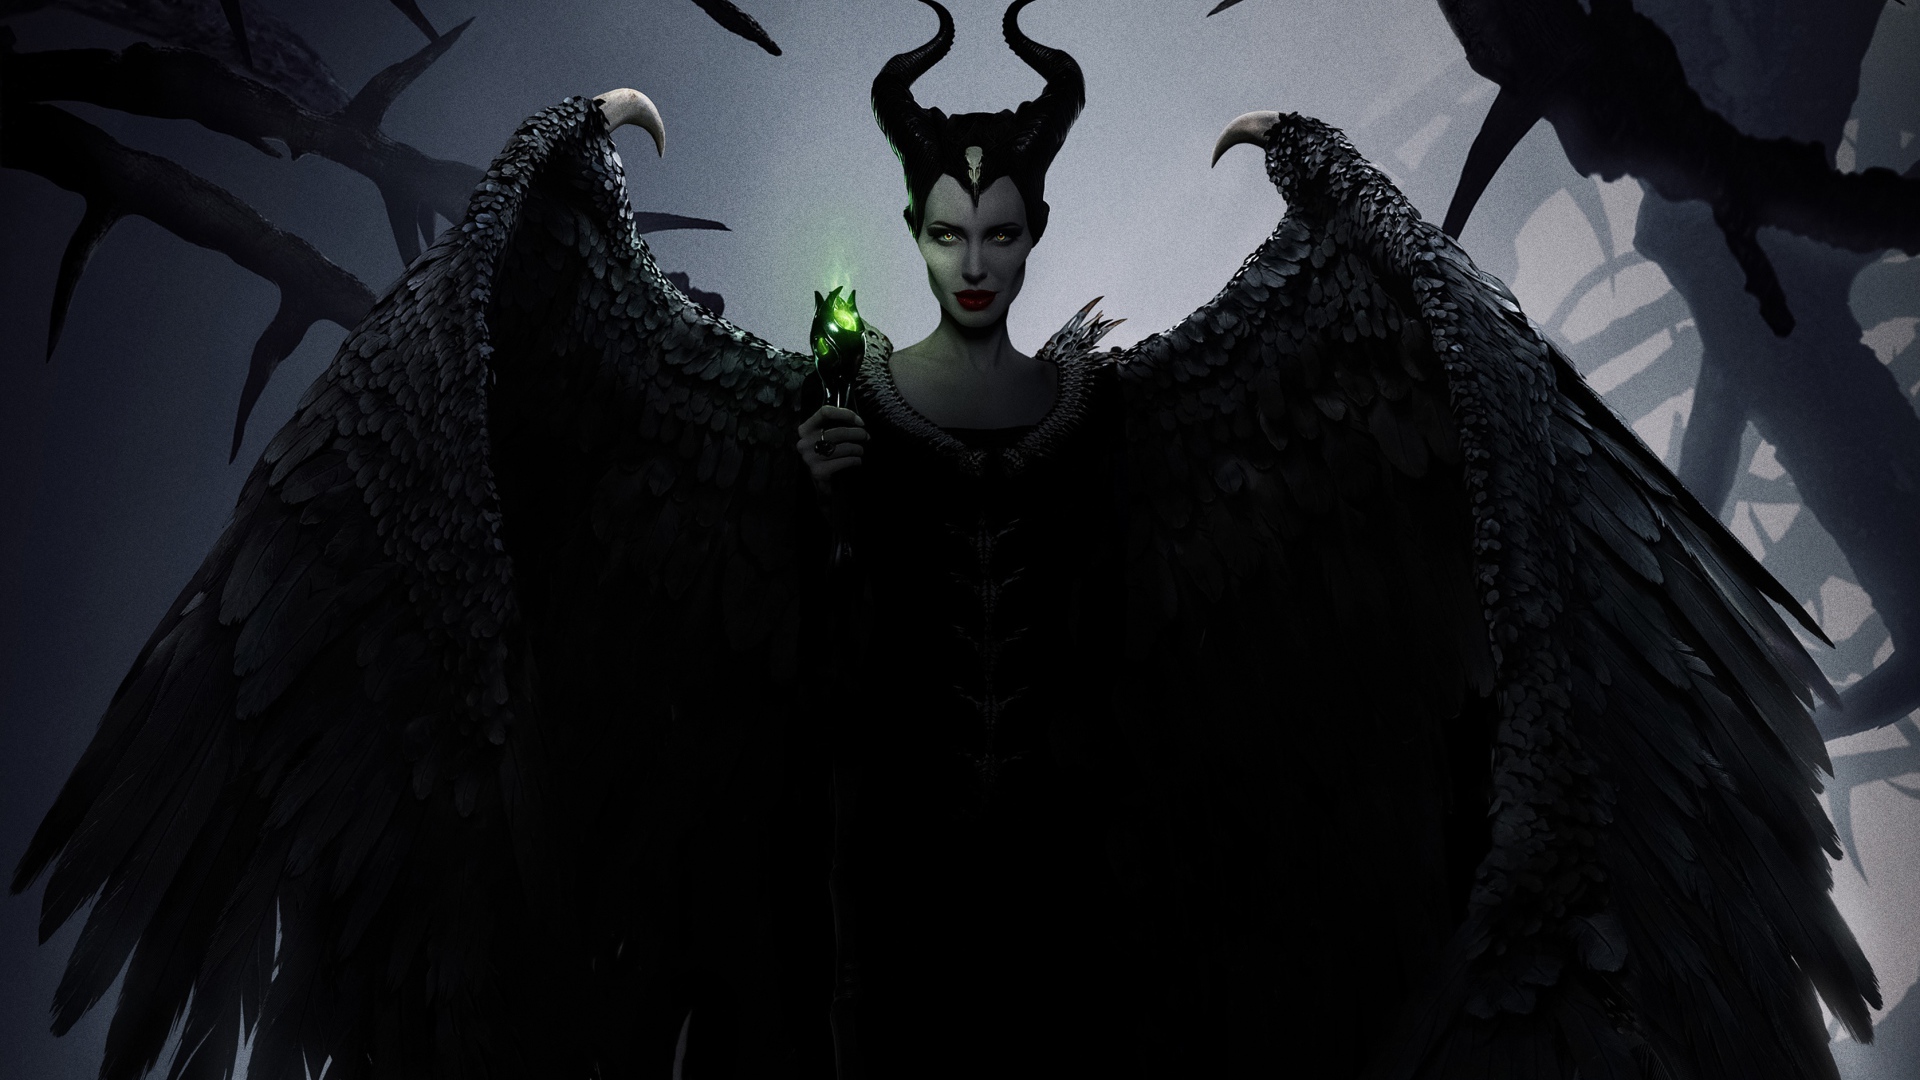 The main character of the film Maleficent: Lady of Darkness